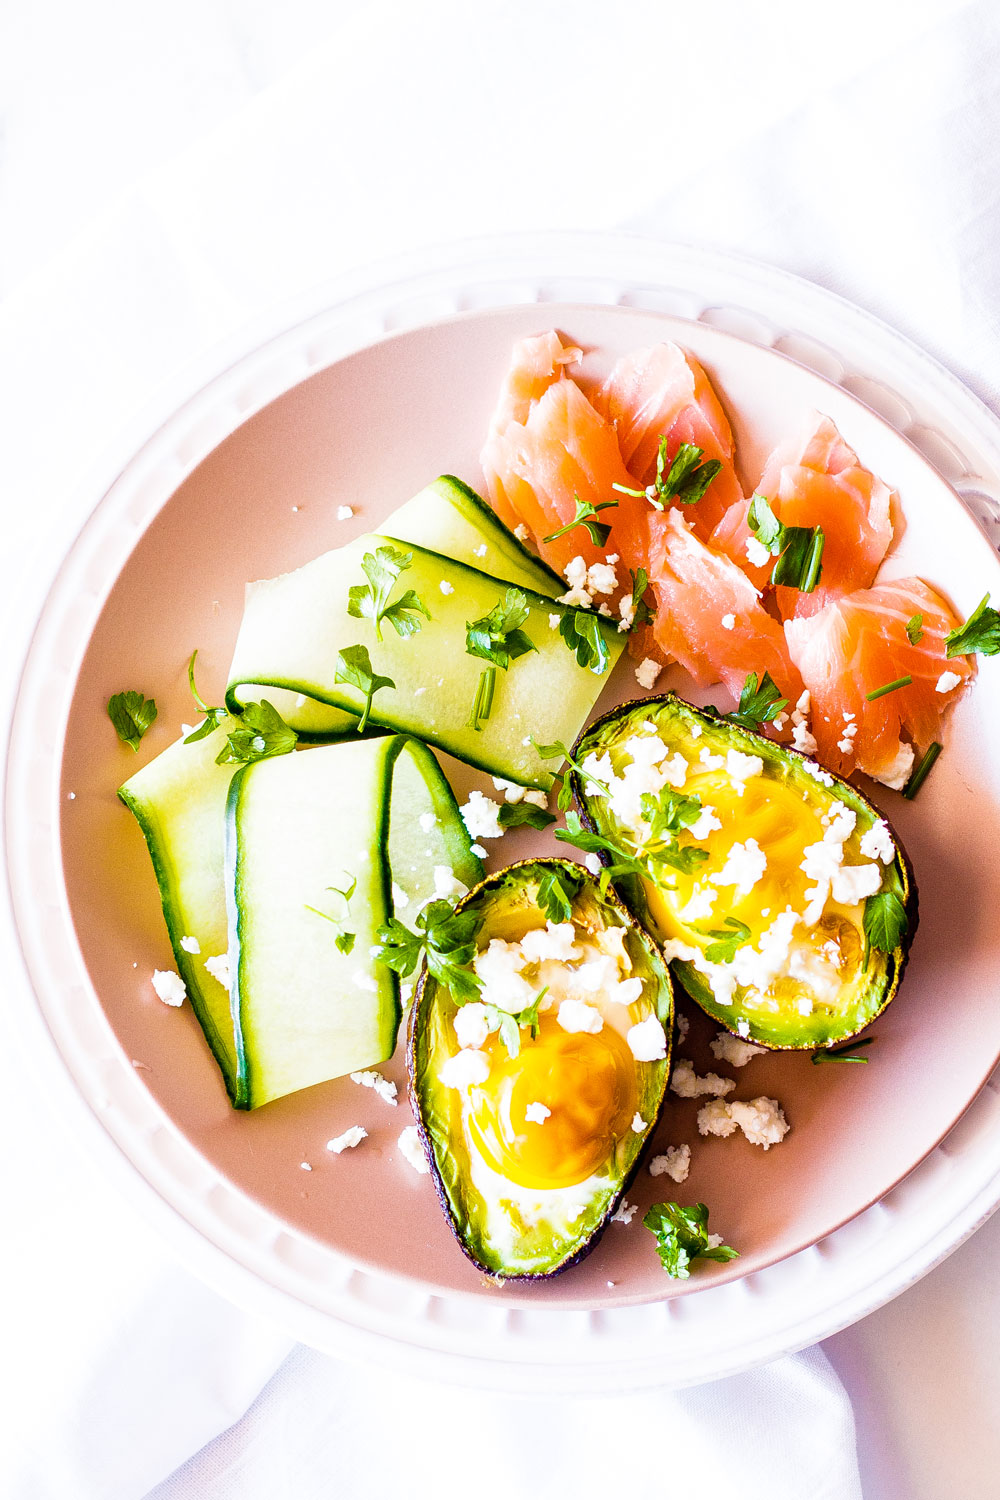 Baked avocado boats with eggs and smoked salmon are a match made in brunch heaven! Not only is this recipe healthy, but it is also gluten-free, high in protein, and low in carbohydrates. https://www.spotebi.com/recipes/baked-avocado-boats-eggs-smoked-salmon/